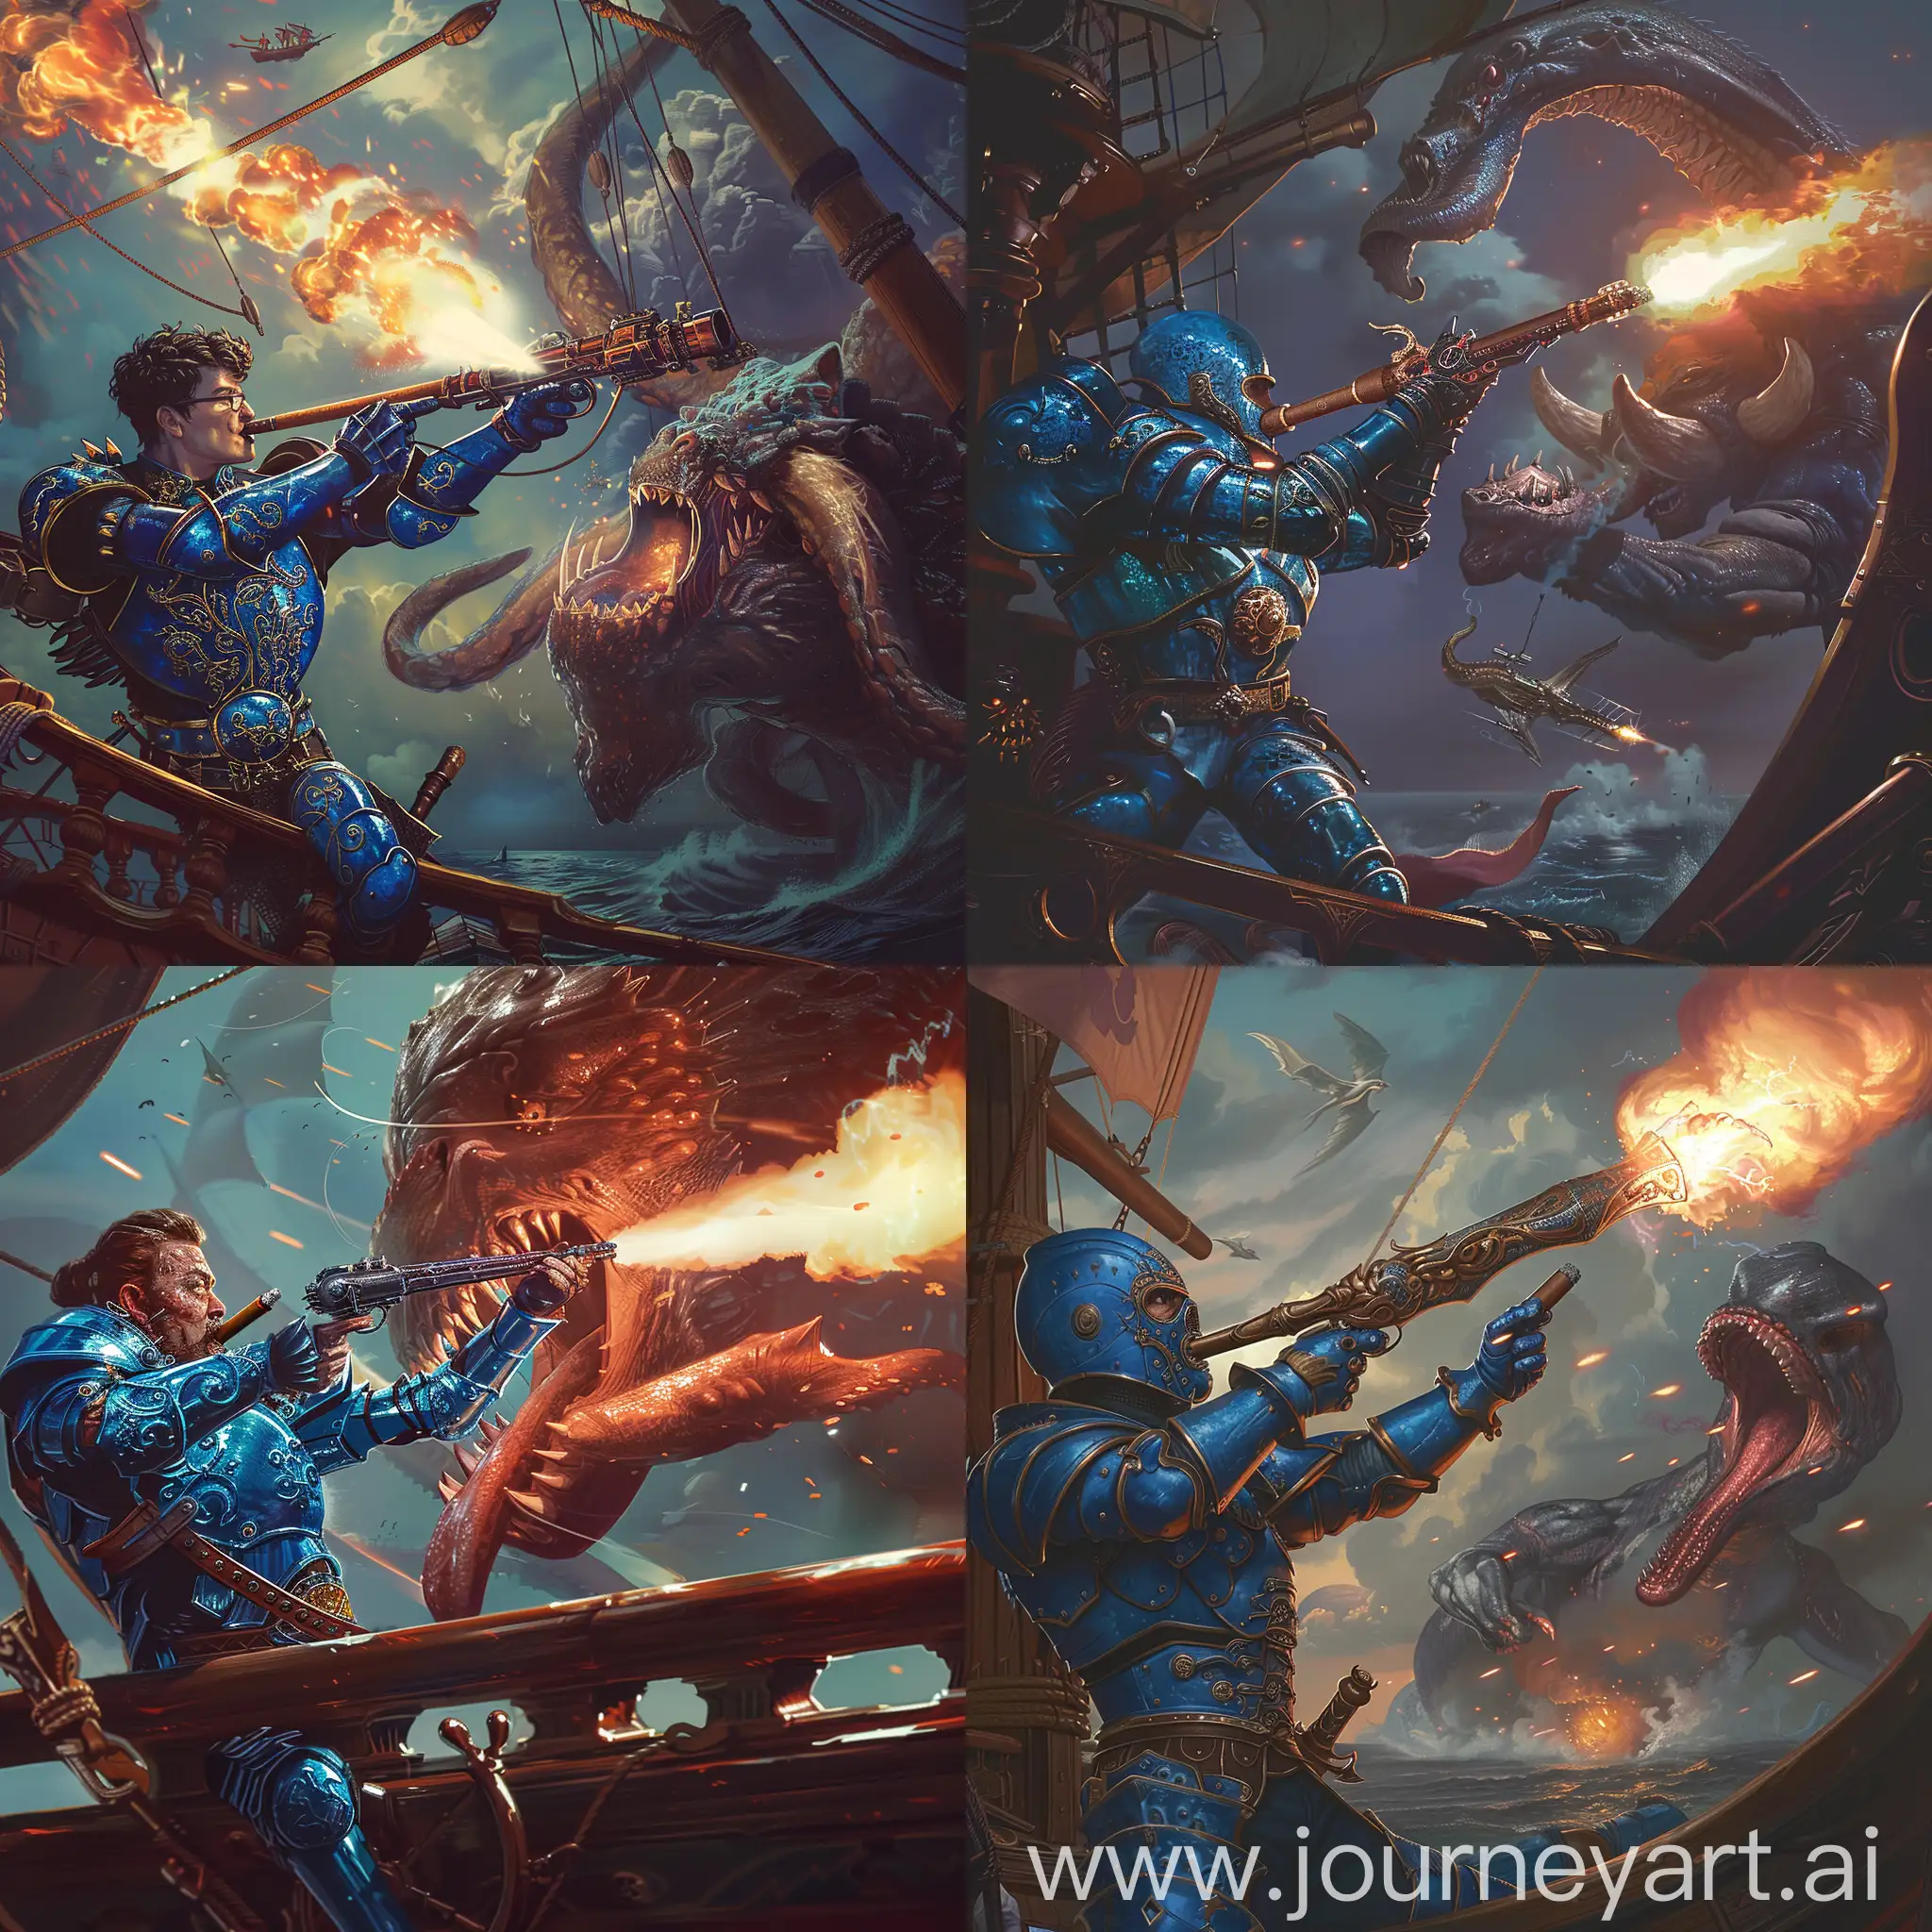 A human fighter called Trevor wearing blue enameled plate armour firing a large balista from the prow of a ship at a large kraken while holding a glowing cigar in his mouth